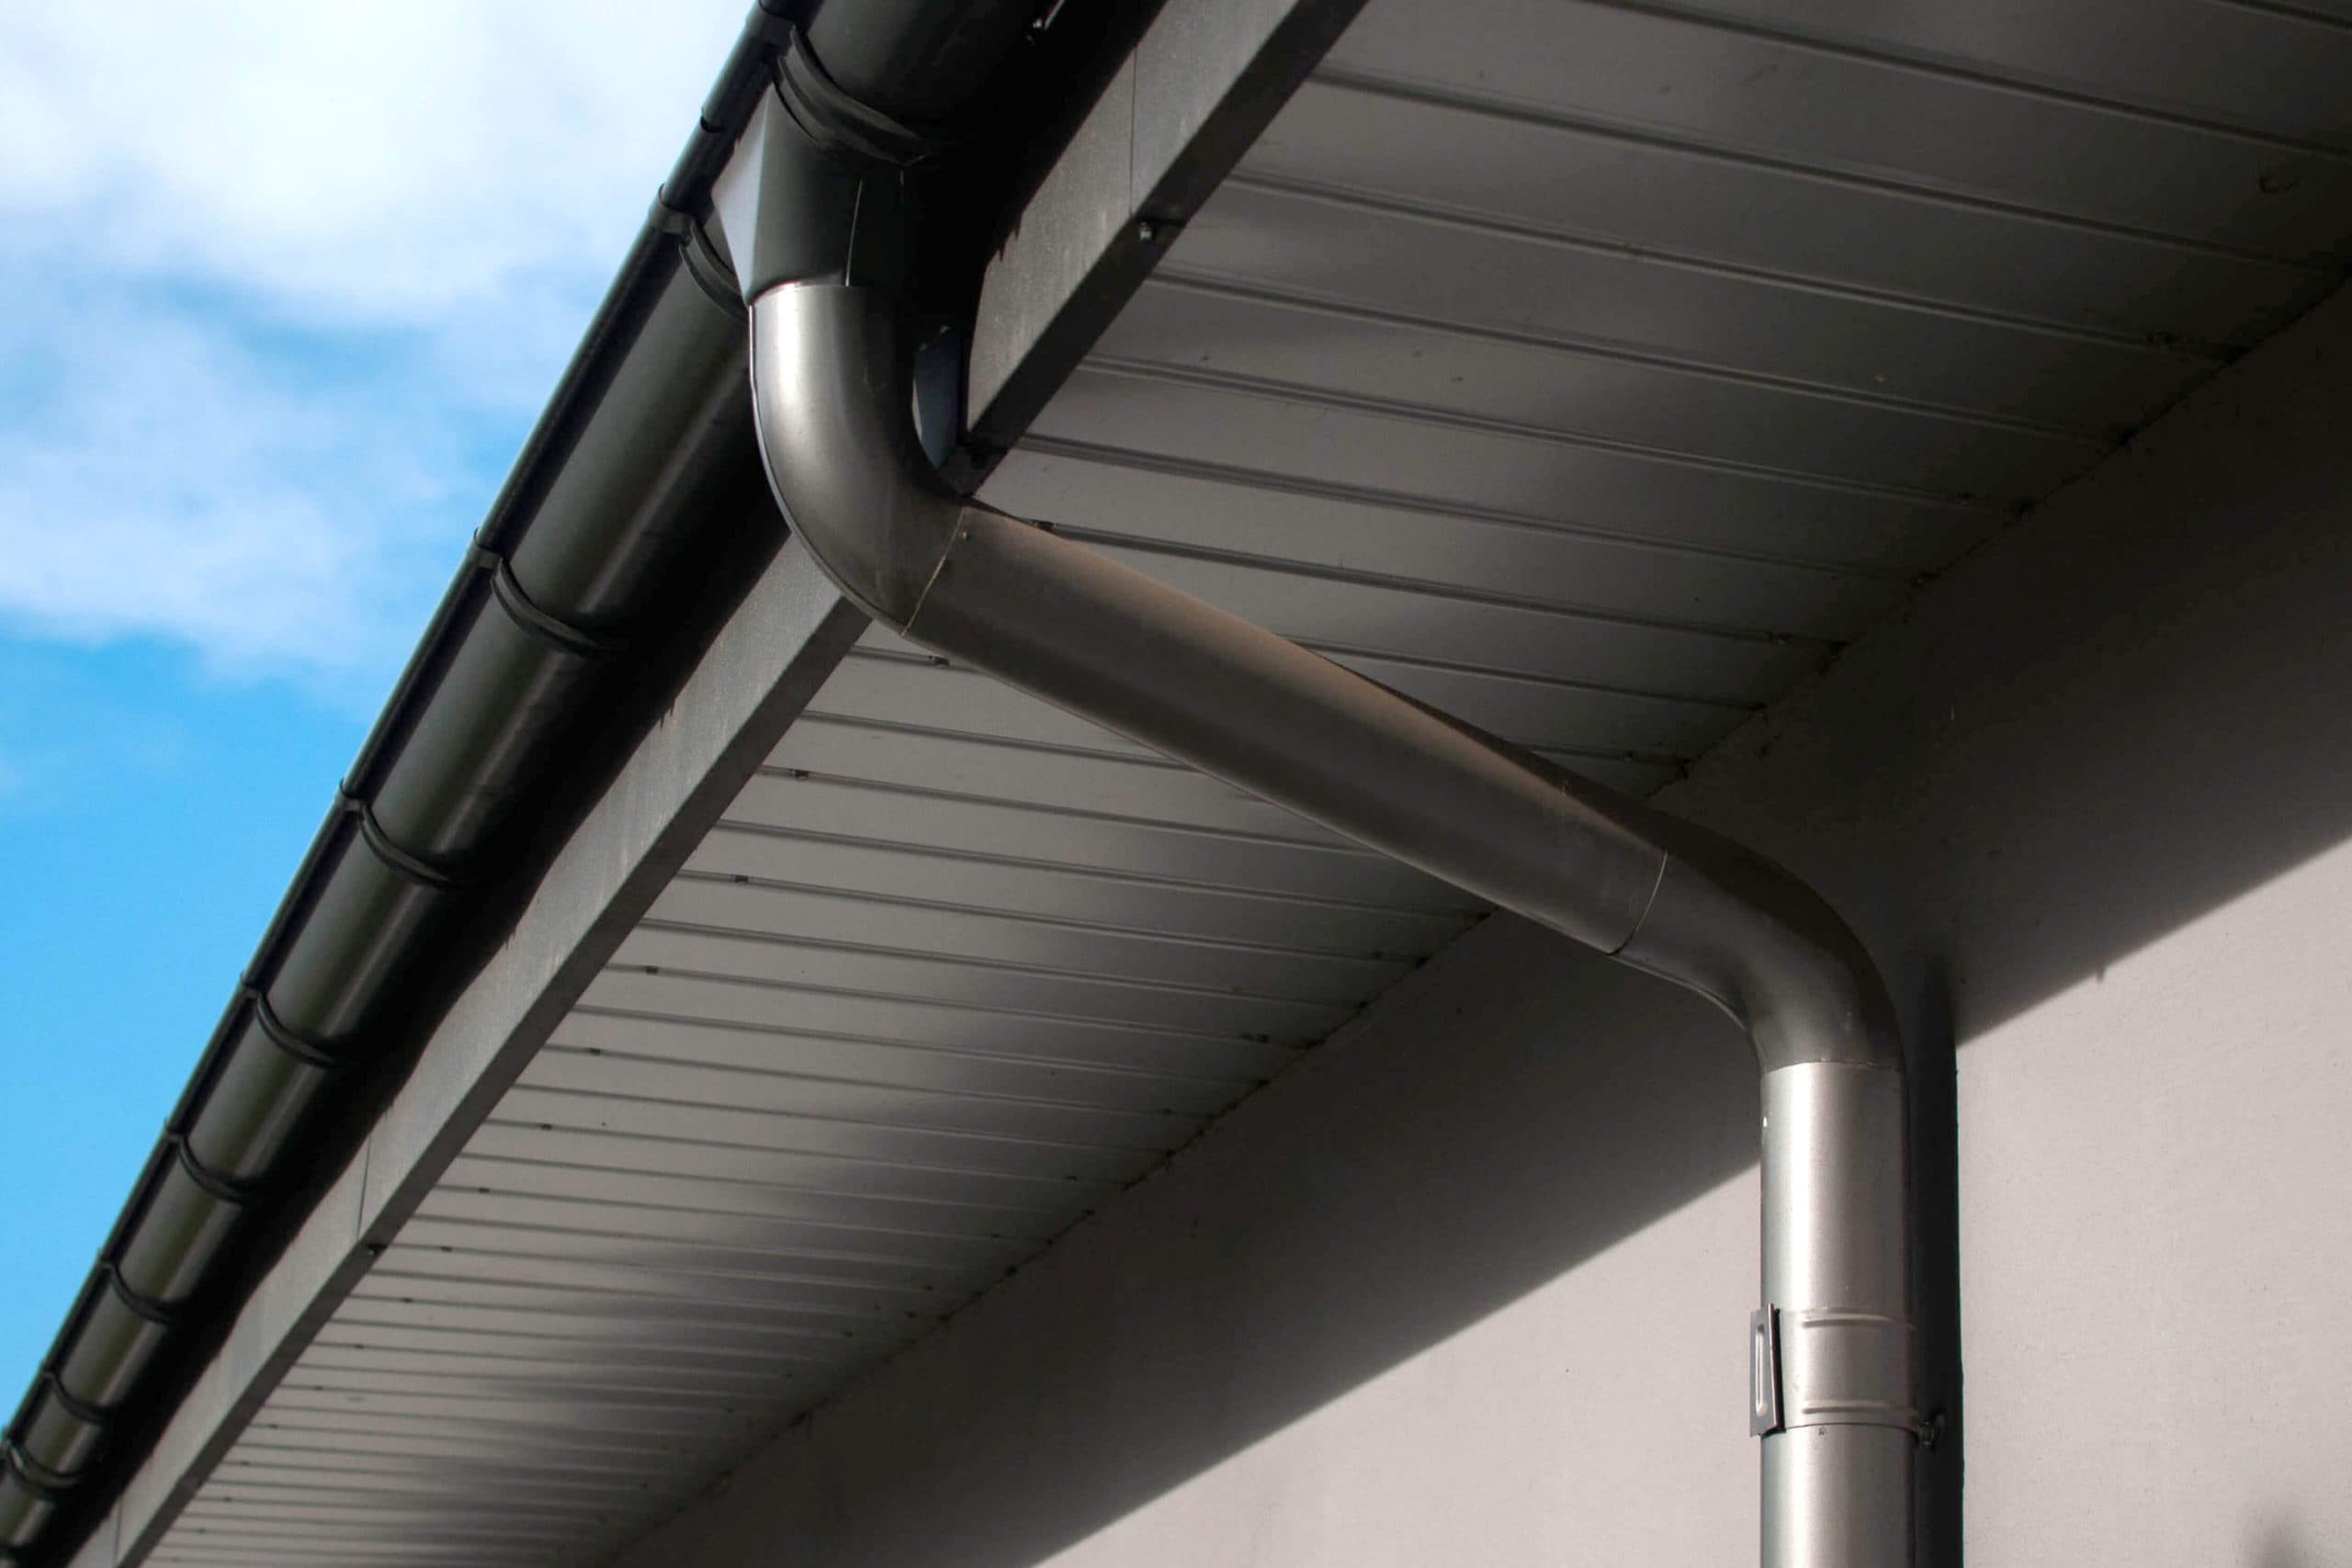 Reliable and affordable Galvanized gutters installation in Baton Rouge